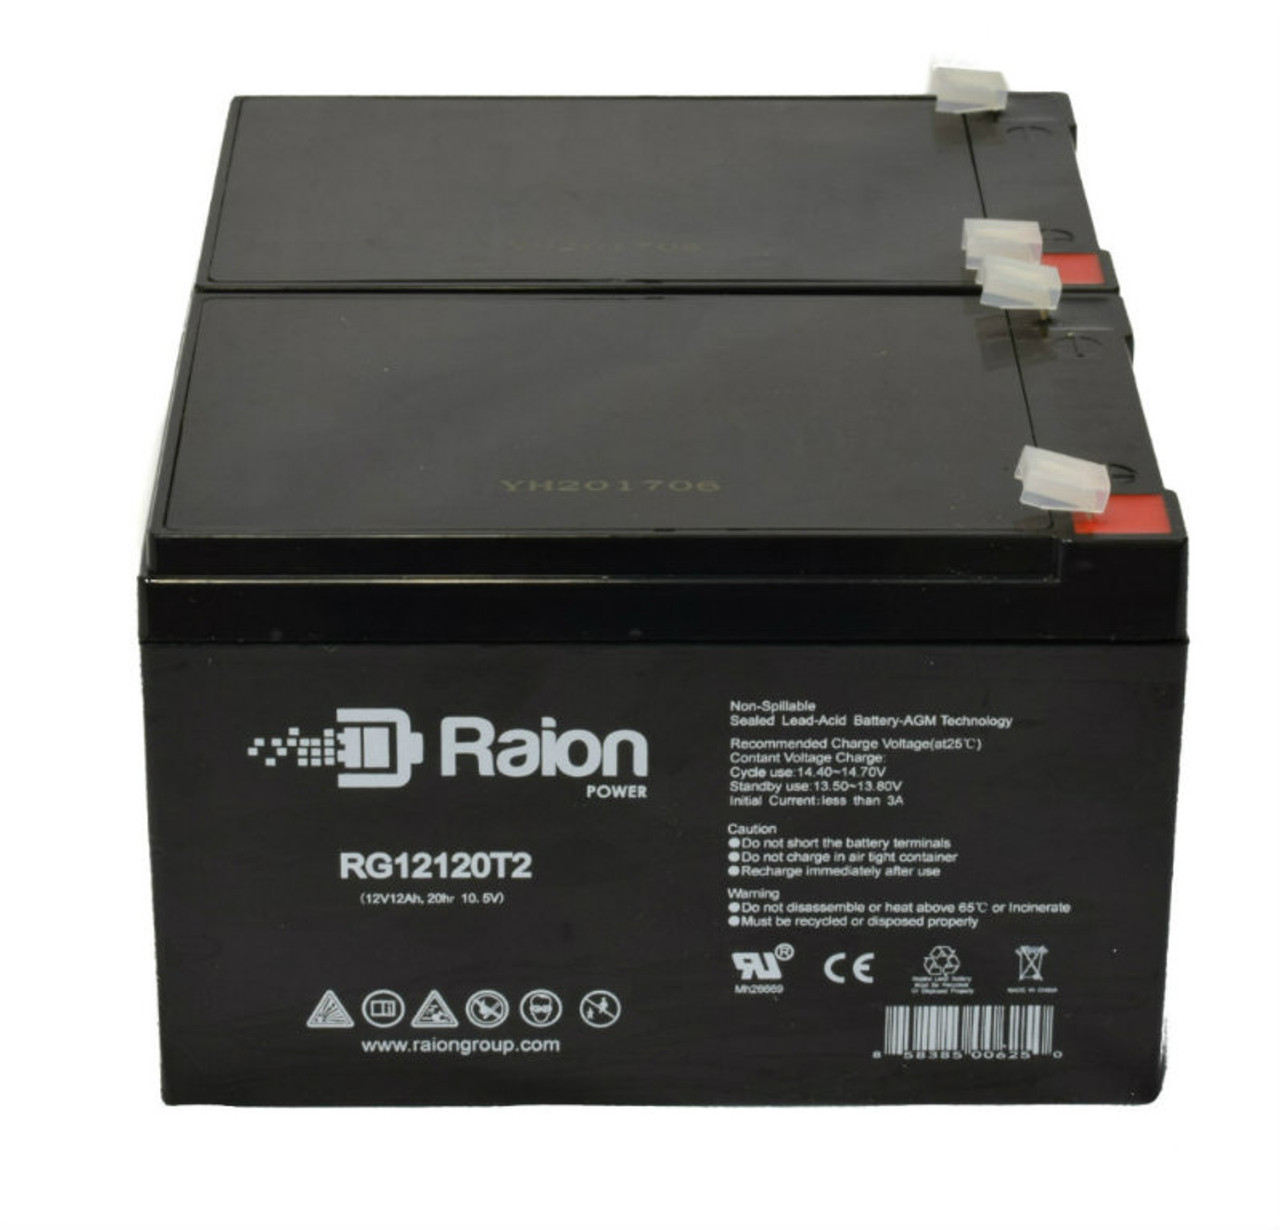 Raion Power RG12120T2 Replacement Fire Alarm Control Panel Battery for Simplex 2081-9274 - 2 Pack